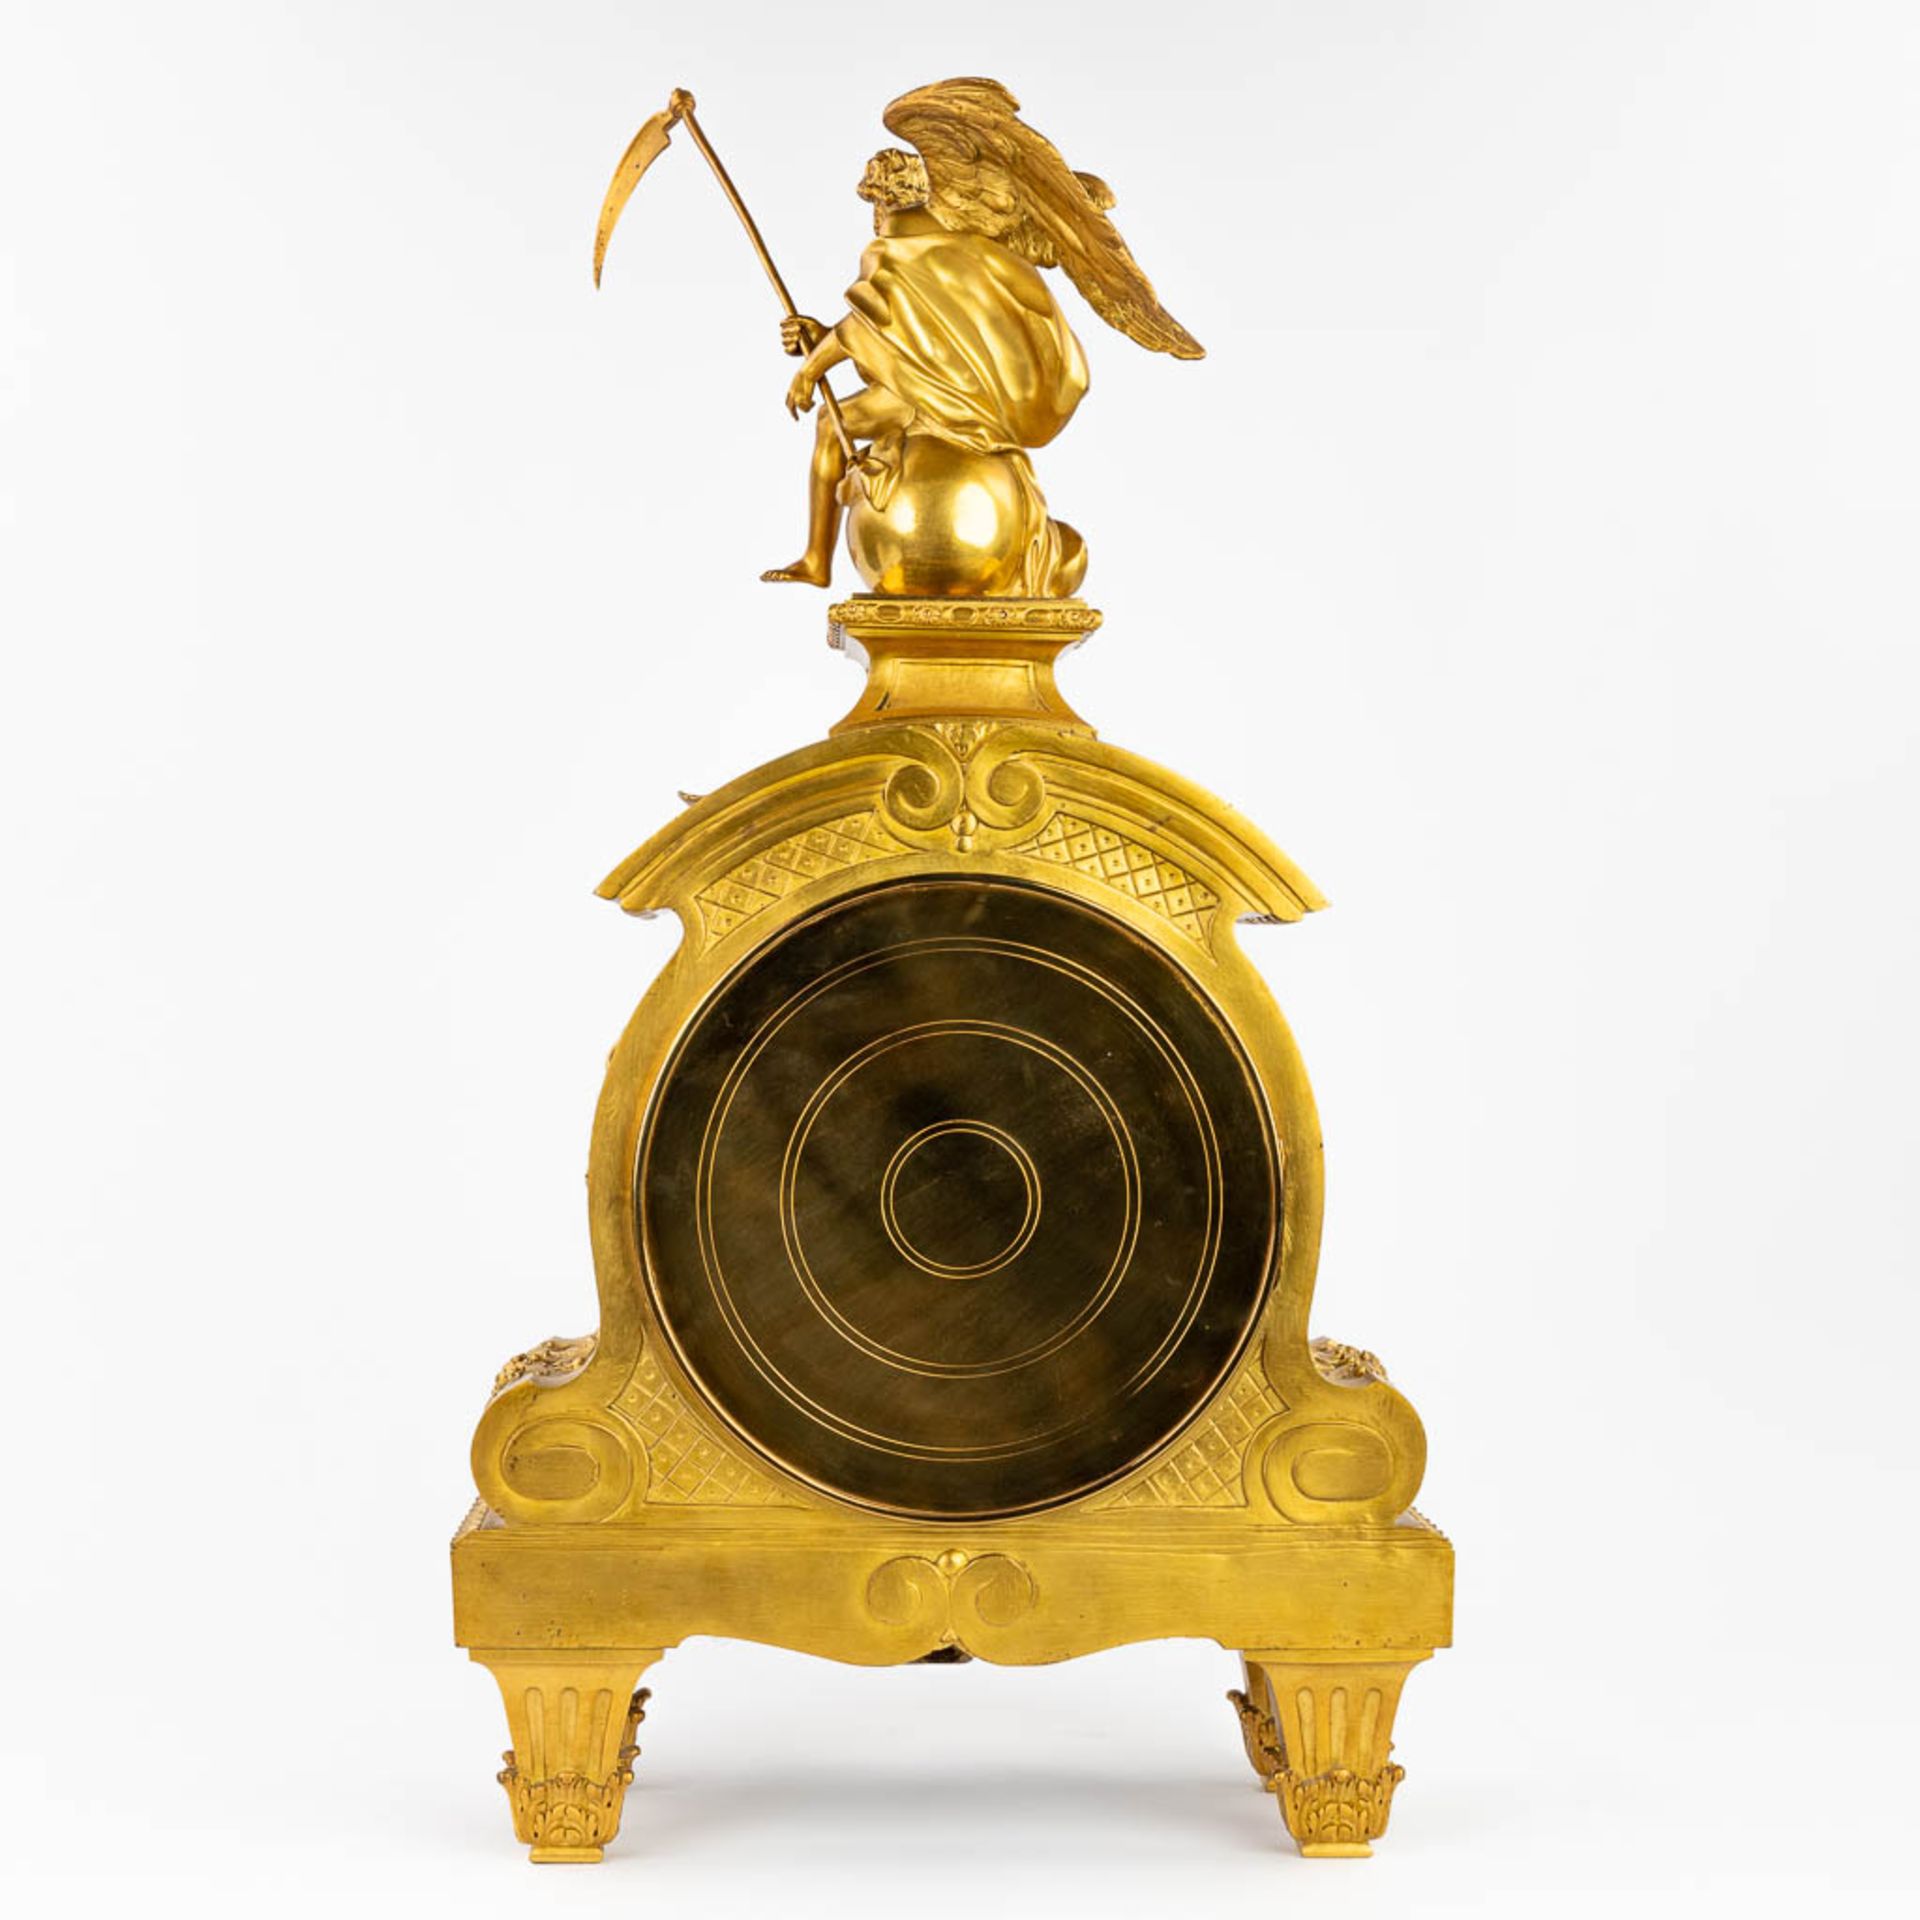 A large mantle clock 'Father Time' made of gilt bronze in Louis XVI style. (18 x 40 x 74cm) - Image 4 of 14